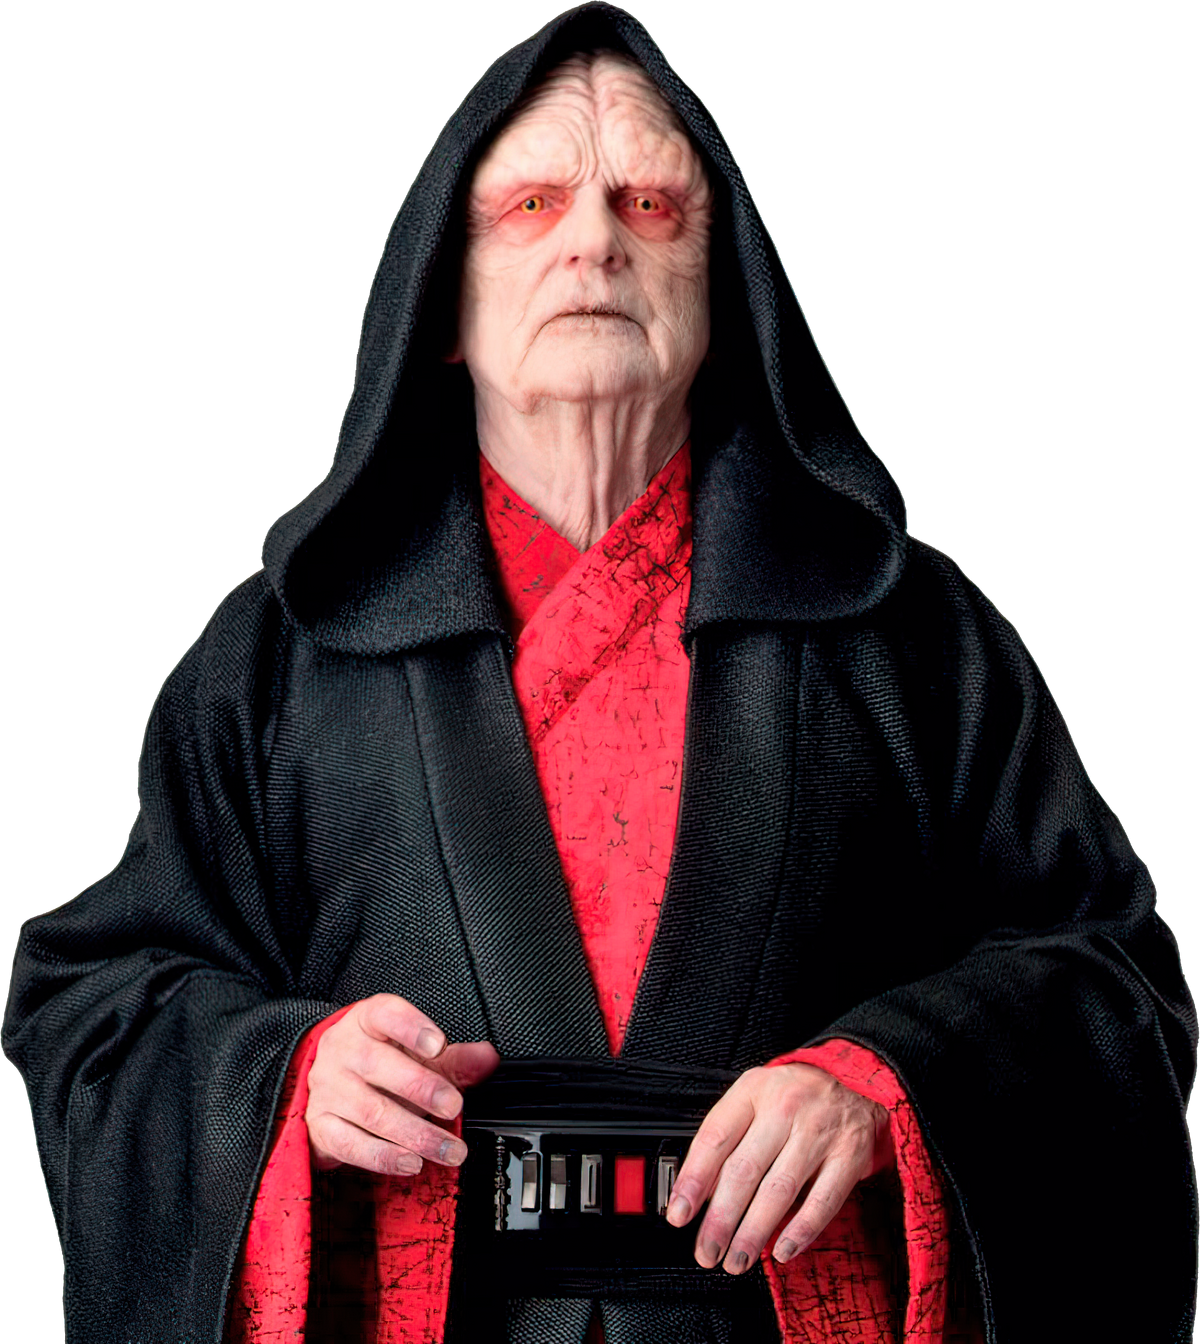 https://static.wikia.nocookie.net/starwars/images/e/e2/Palpatine-CEUEEd.png/revision/latest/scale-to-width-down/1200?cb=20220511050702